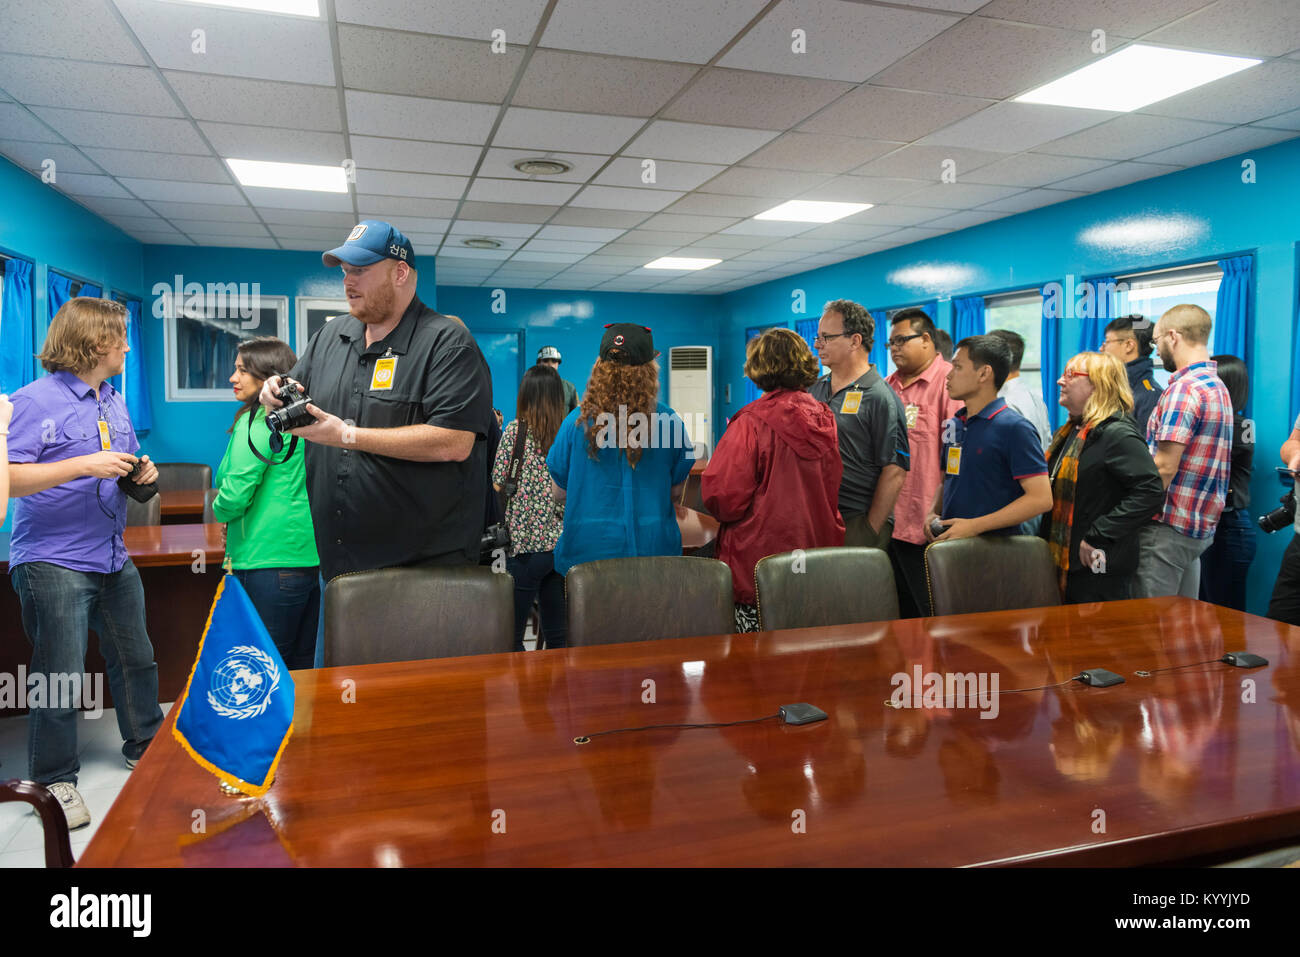 DMZ, Korea - Tourists in blue conference room at Joint Security Area (JSA), Panmunjom, along the Military Demarcation Line North and South Korea Stock Photo